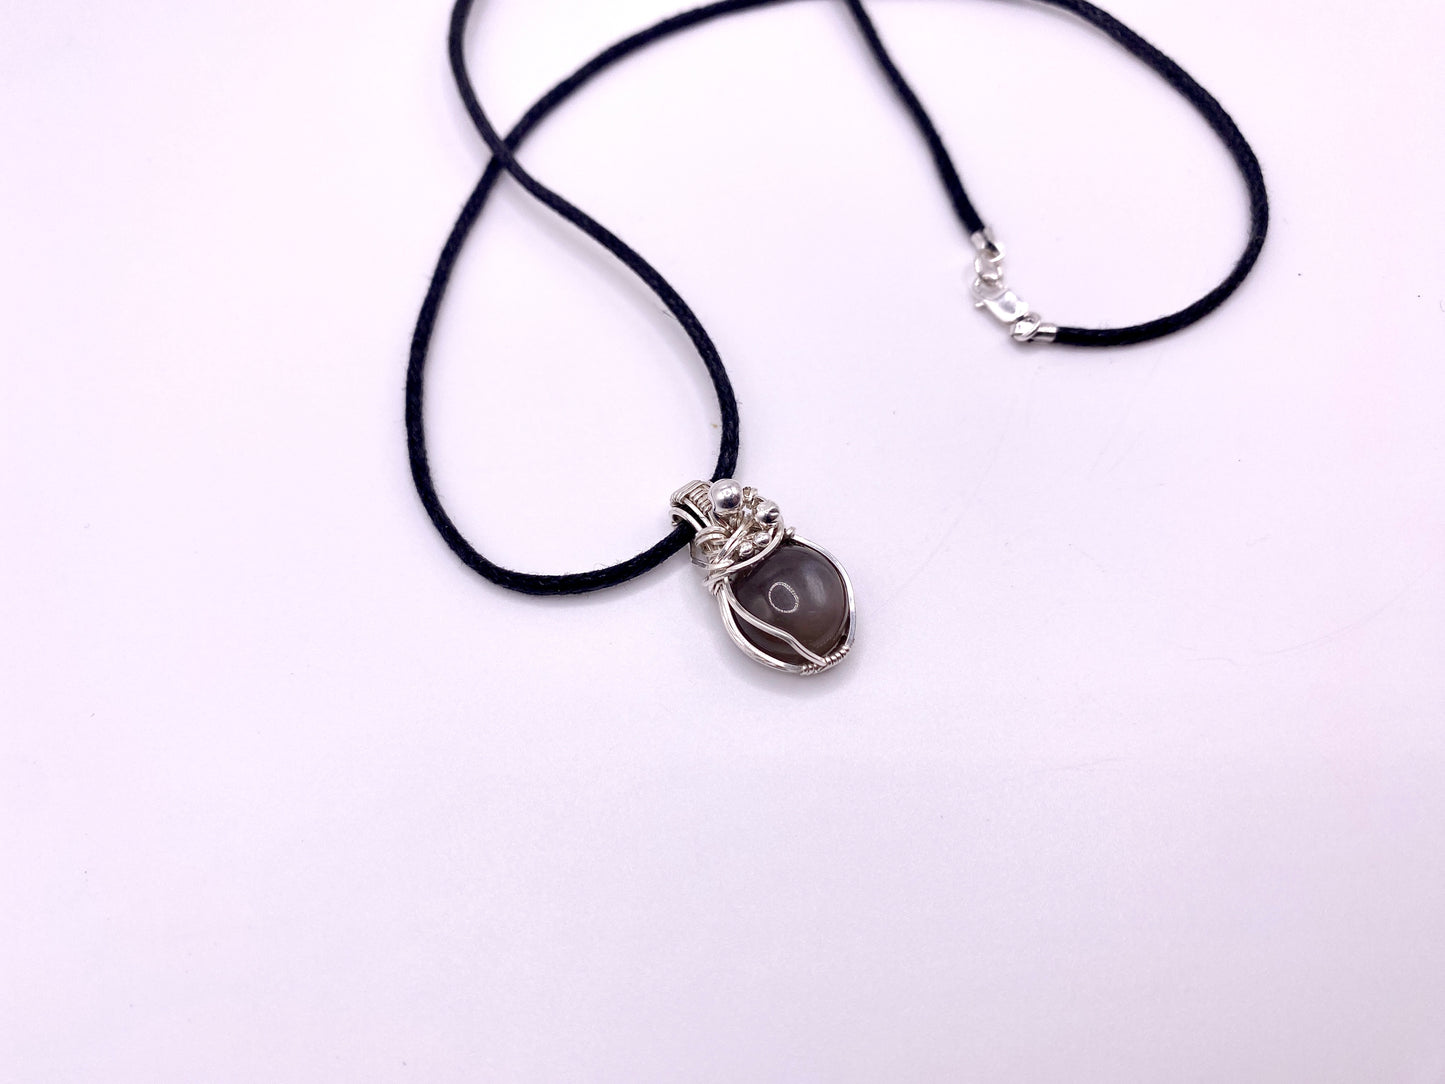 New Moon Wire Wrapped Gray Mini Moonstone Necklace - Original Design in .925 Sterling Silver Wire